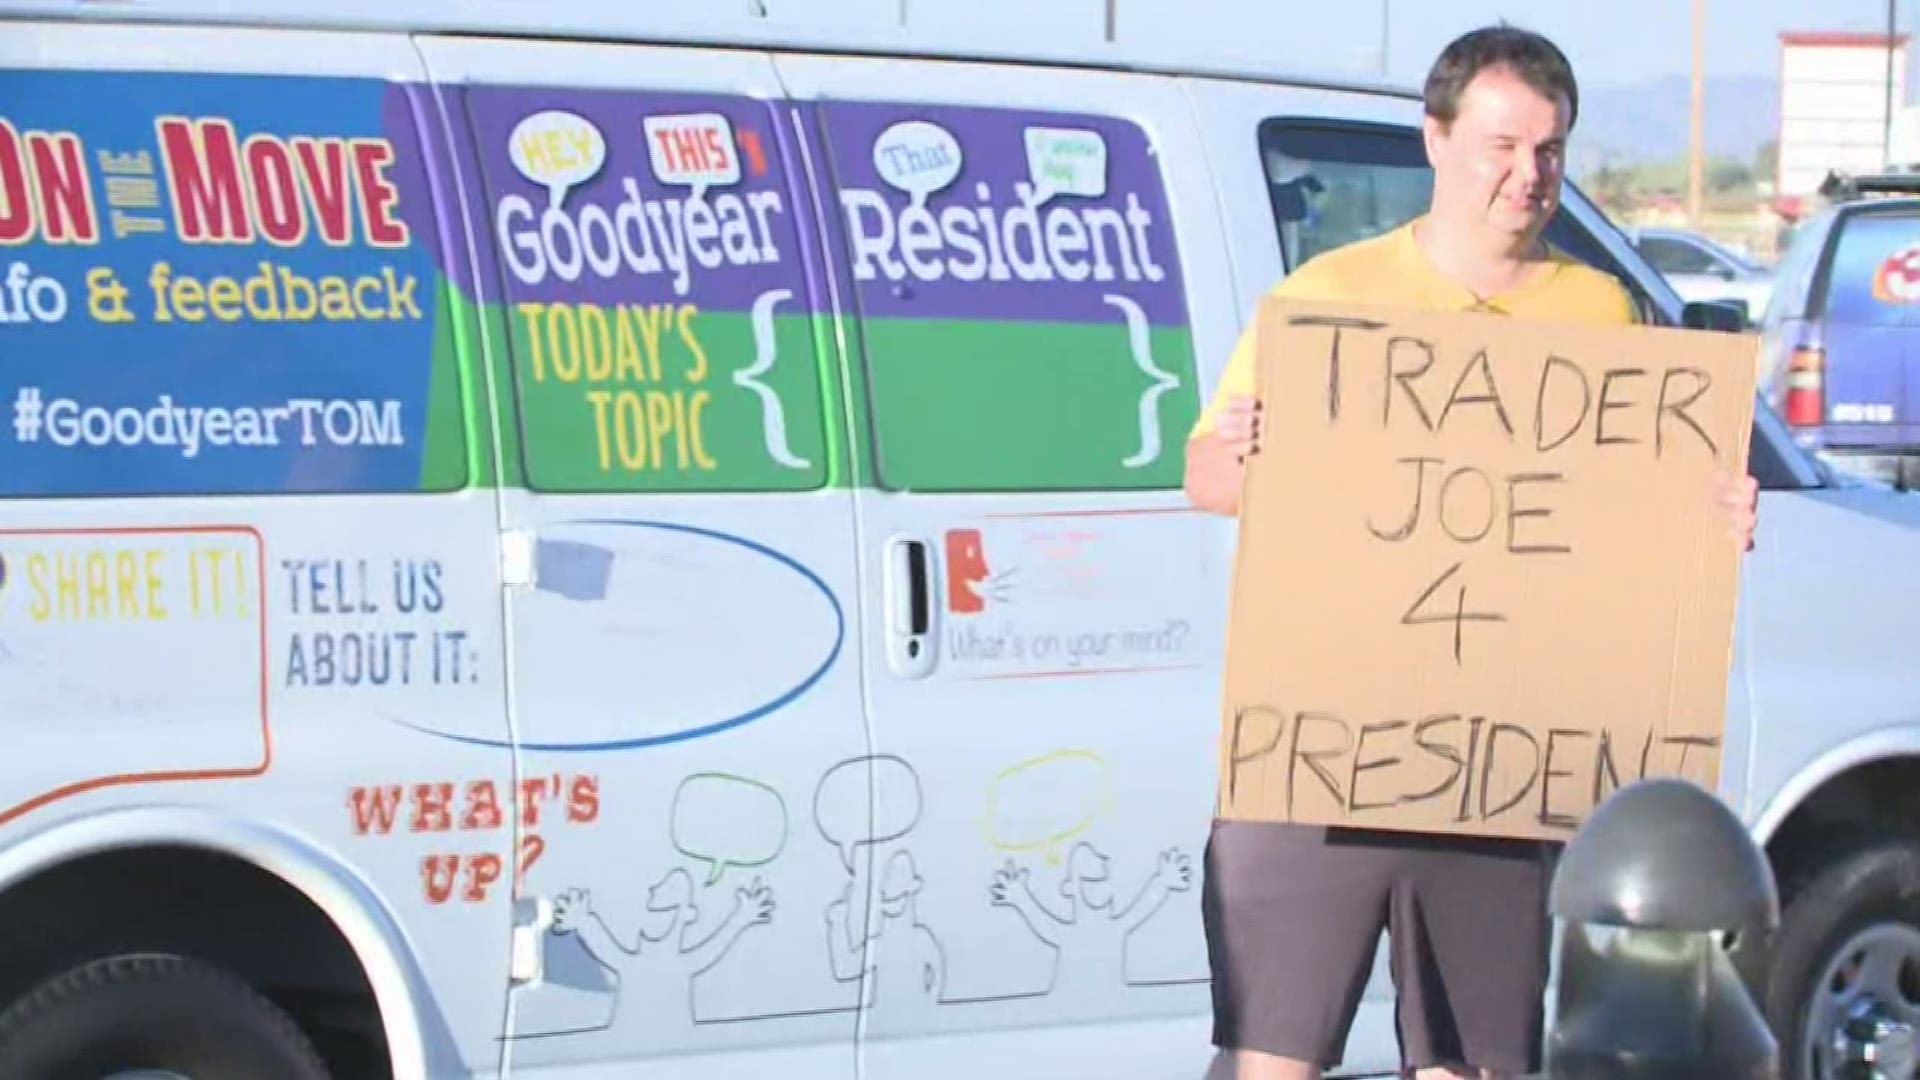 The Mayor of Goodyear proclaimed "We Want Trader Joe's Day" to ask the grocery chain to come to the city. One man held a sign saying "Trader Joe 4 President."